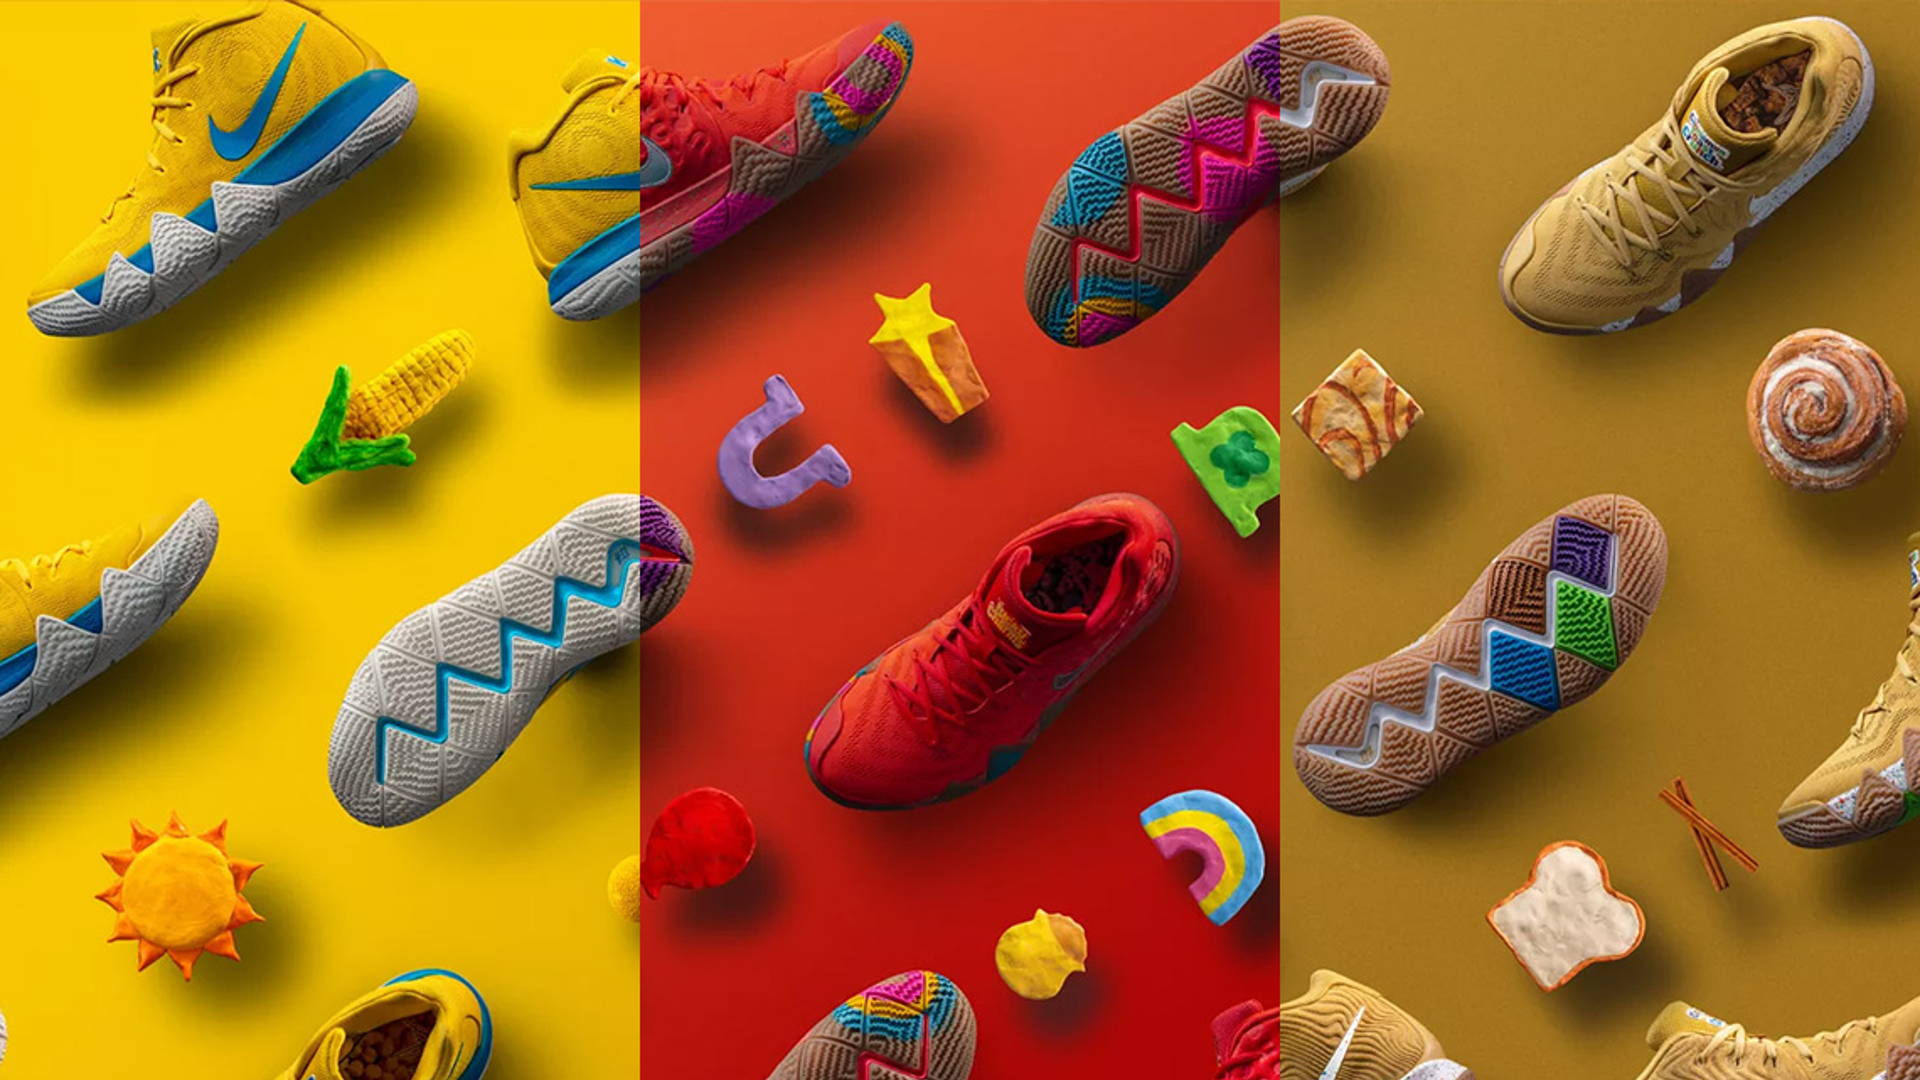 General Mills, Nike & Kyrie Irving Team Up To Give You Delicious Sneakers |  Dieline - Design, Branding & Packaging Inspiration